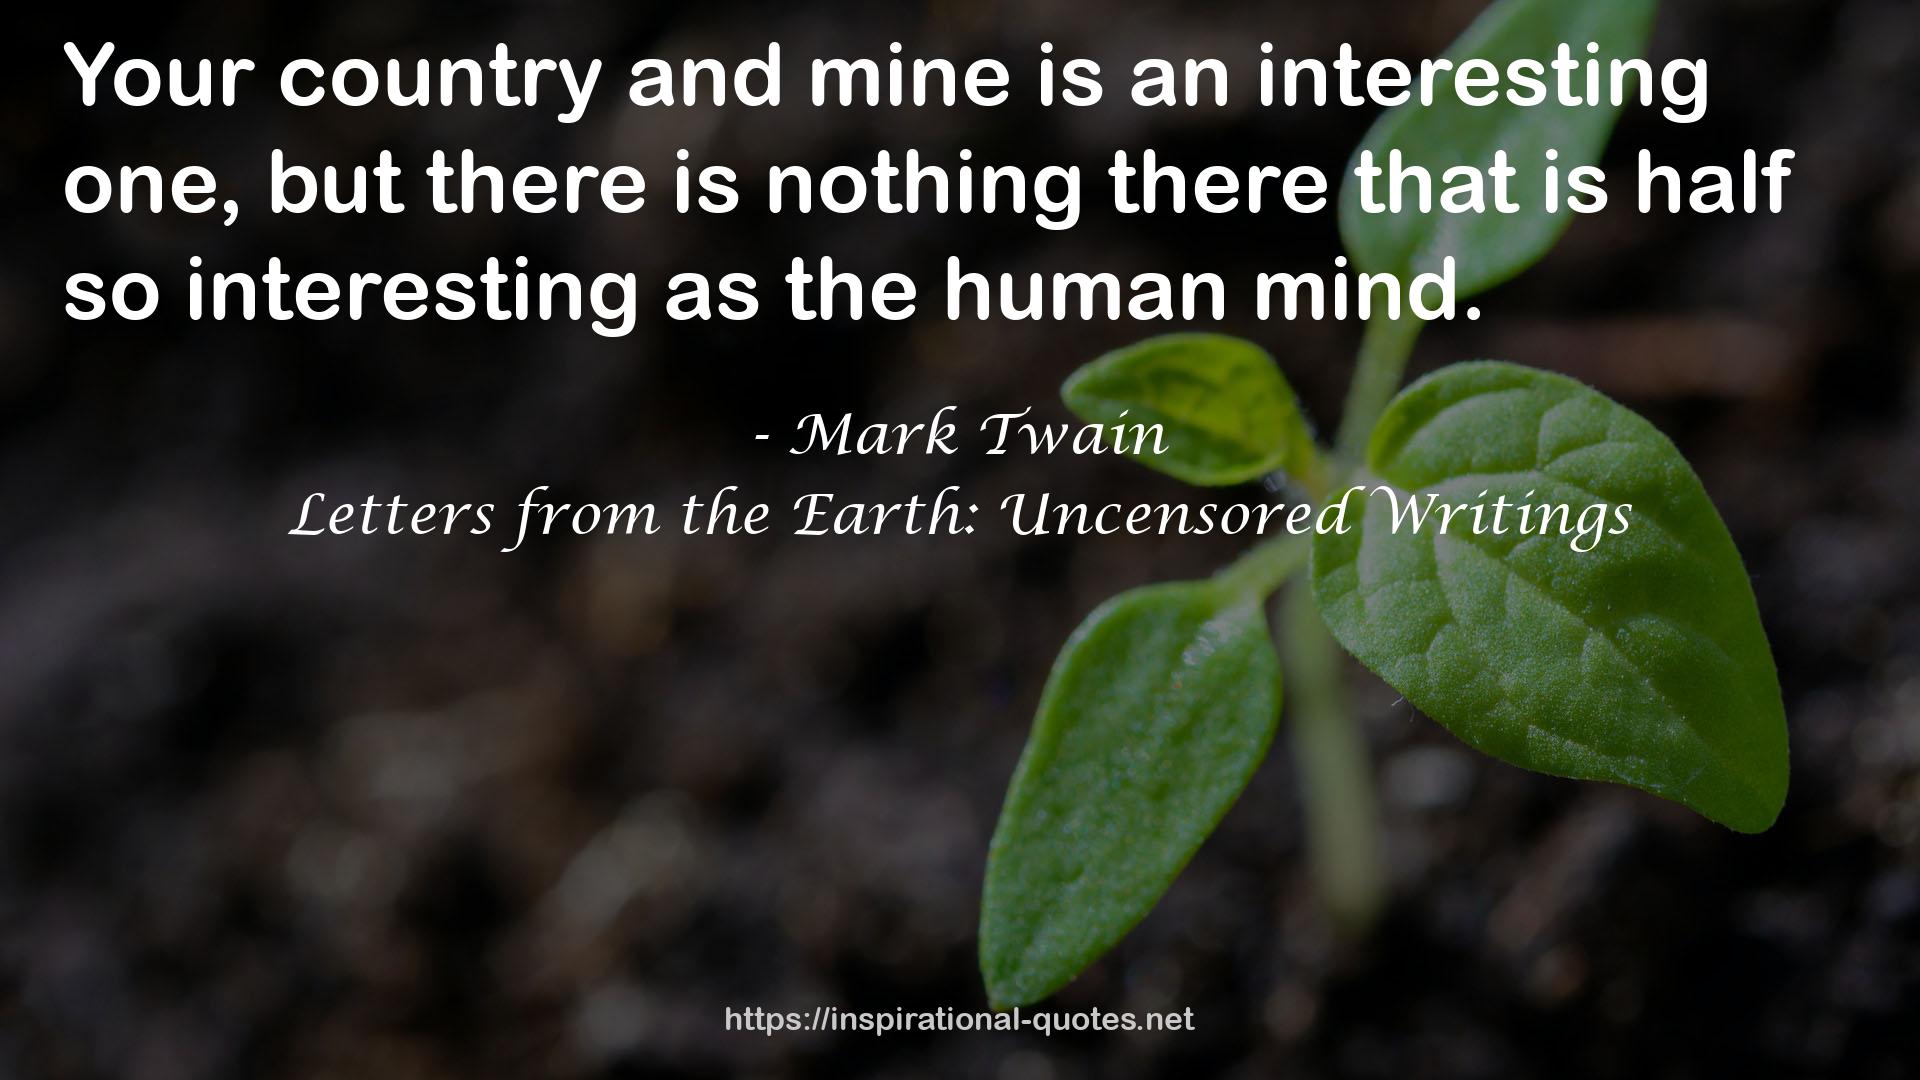 Letters from the Earth: Uncensored Writings QUOTES